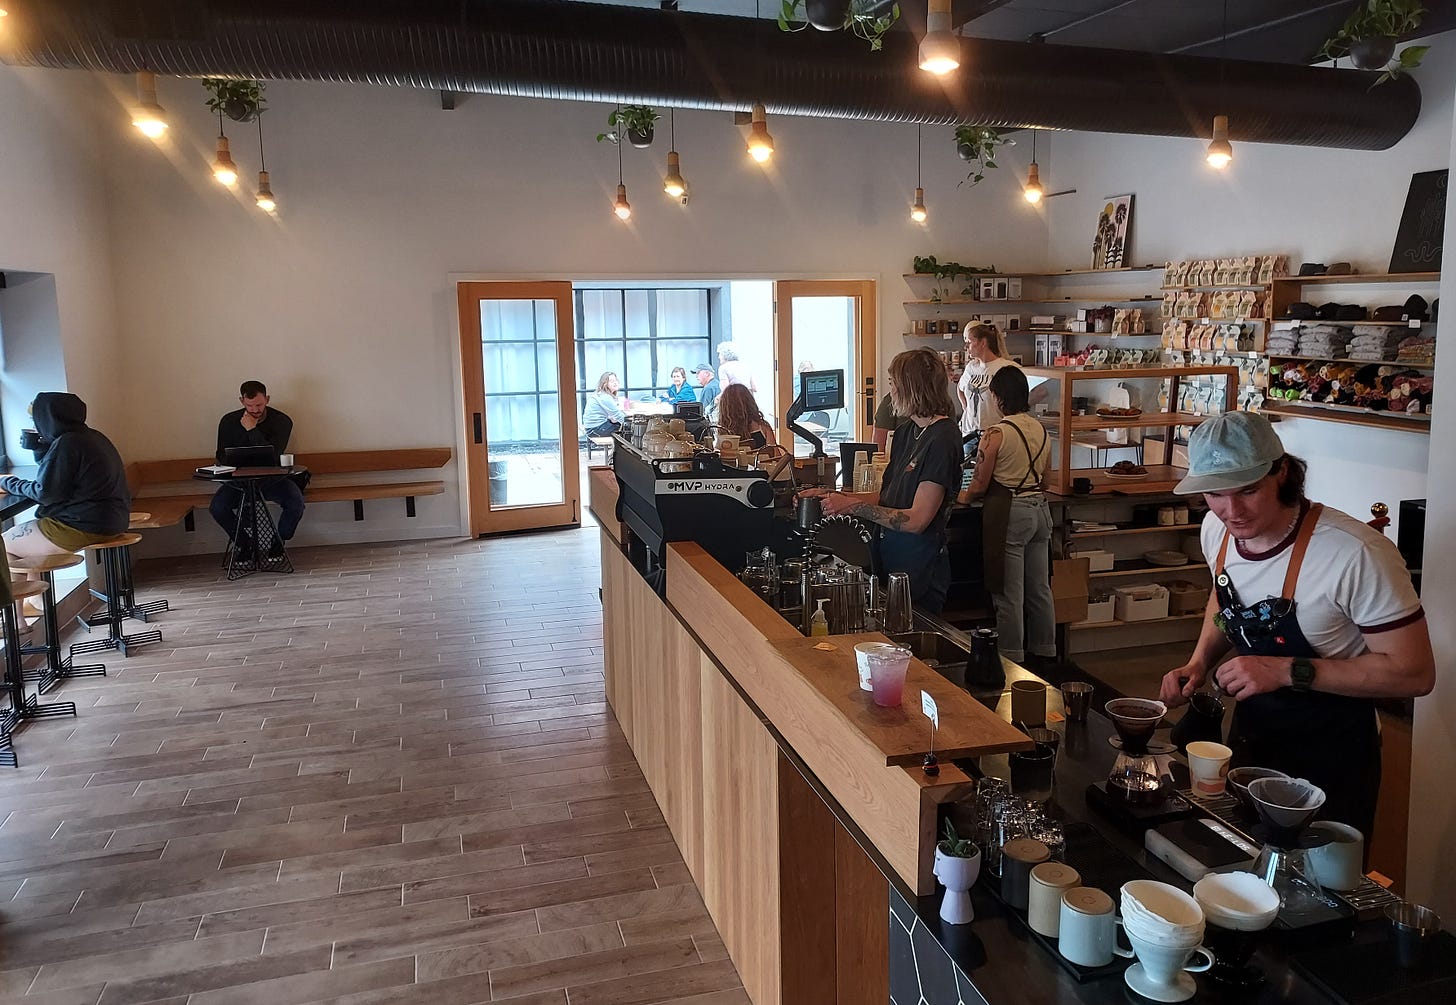 A wide shot of a coffee bar and open coffee shop space leading to an outdoor patio. On the right baristas pull shots at an expresso machine and make pourover style coffees. The coffee bar is a soft blonde wood.